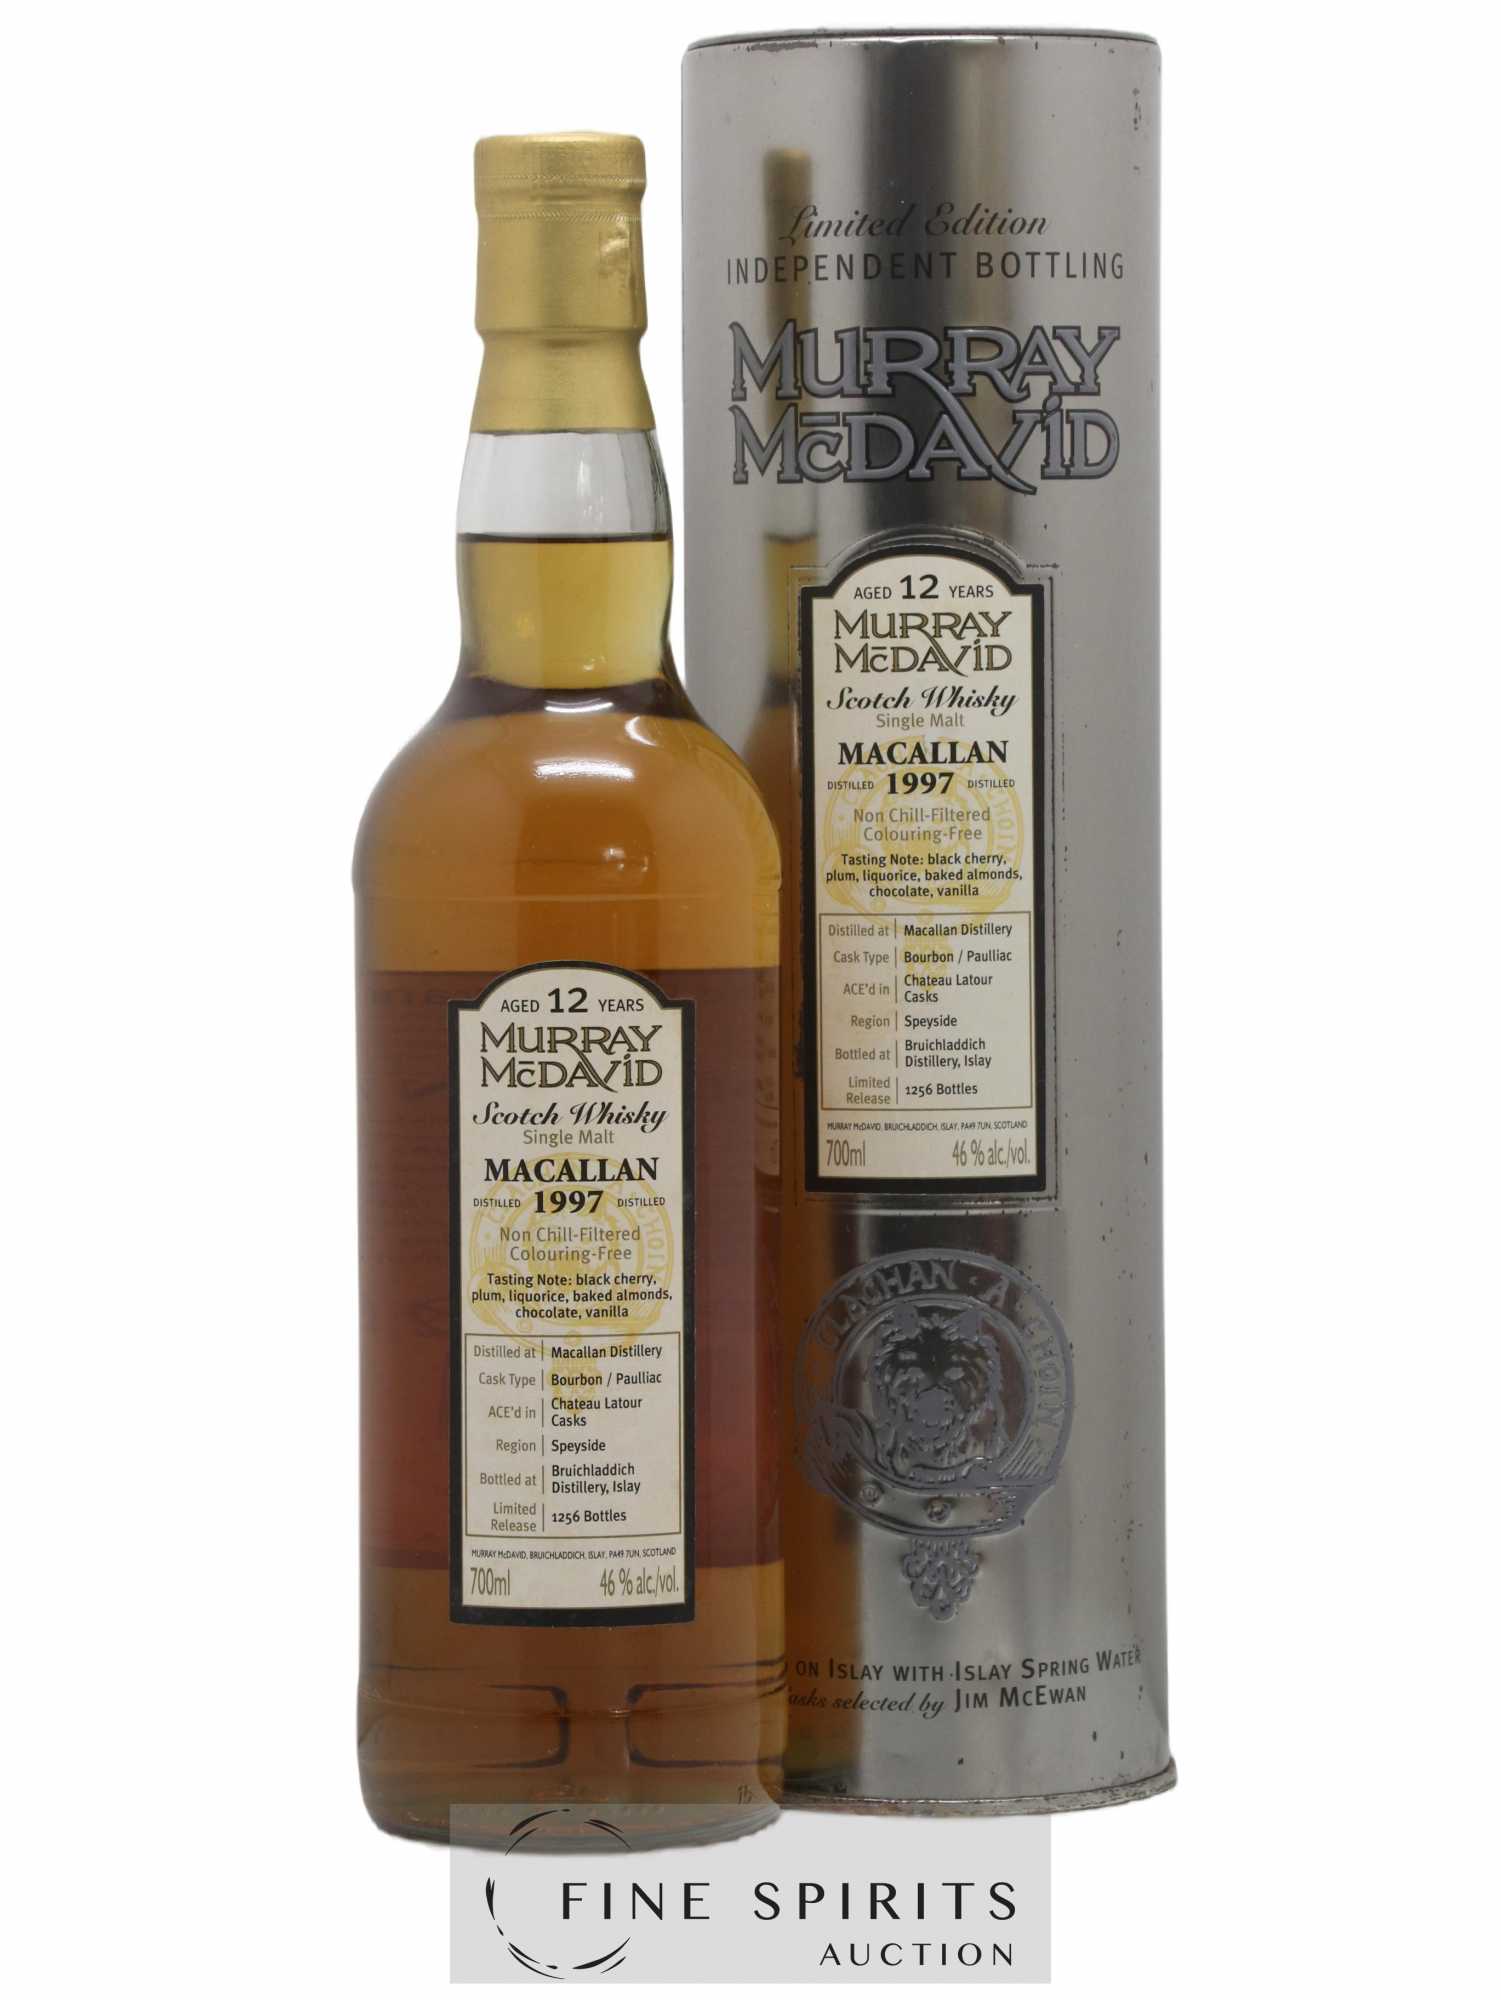 Macallan (The) 12 years 1997 Murray Mc David Ace'd in Château Latour Casks - One of 1256